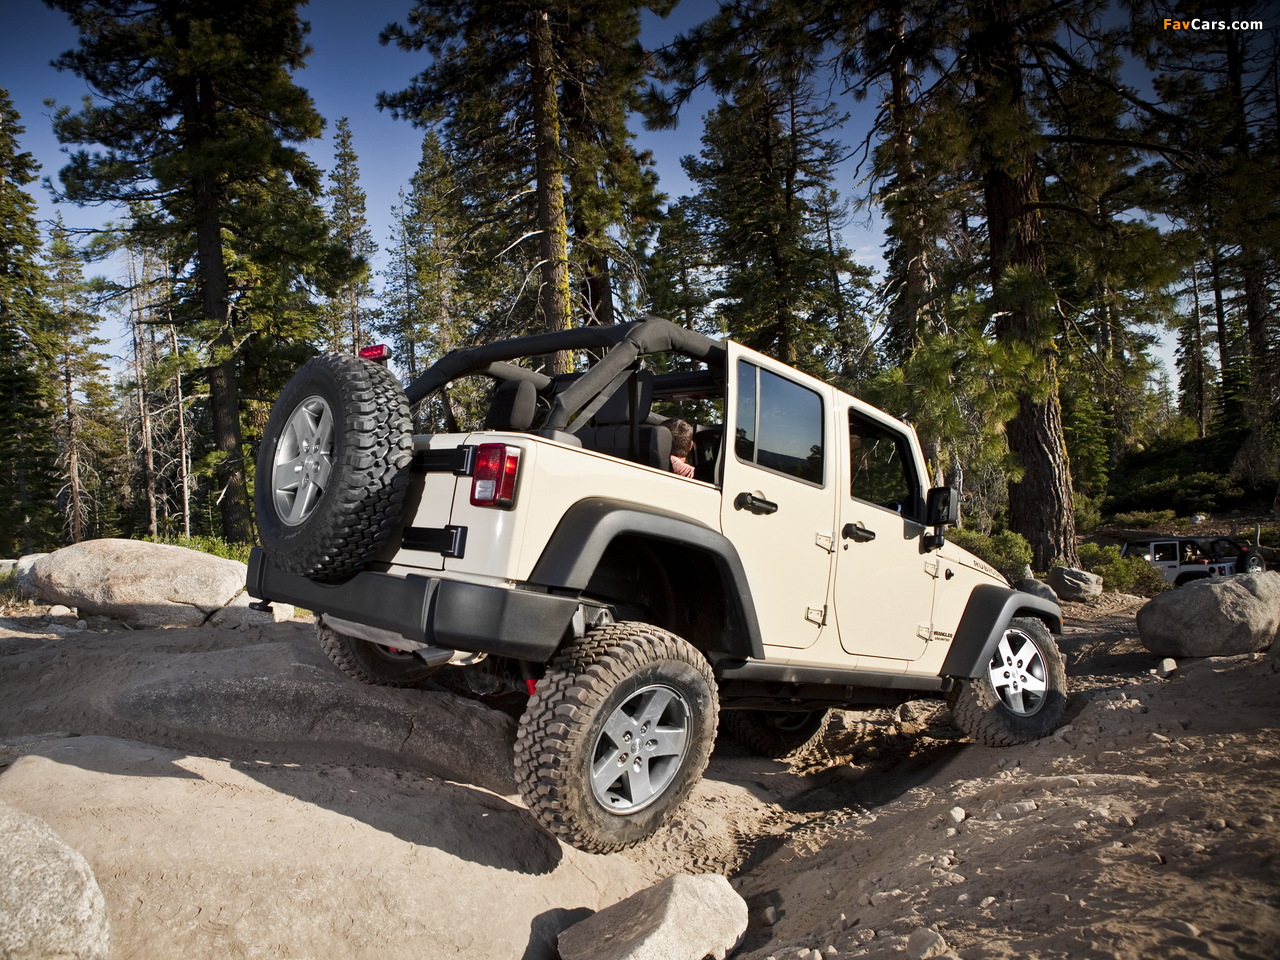 Jeep Wrangler Unlimited Rubicon (JK) 2010 pictures (1280 x 960)